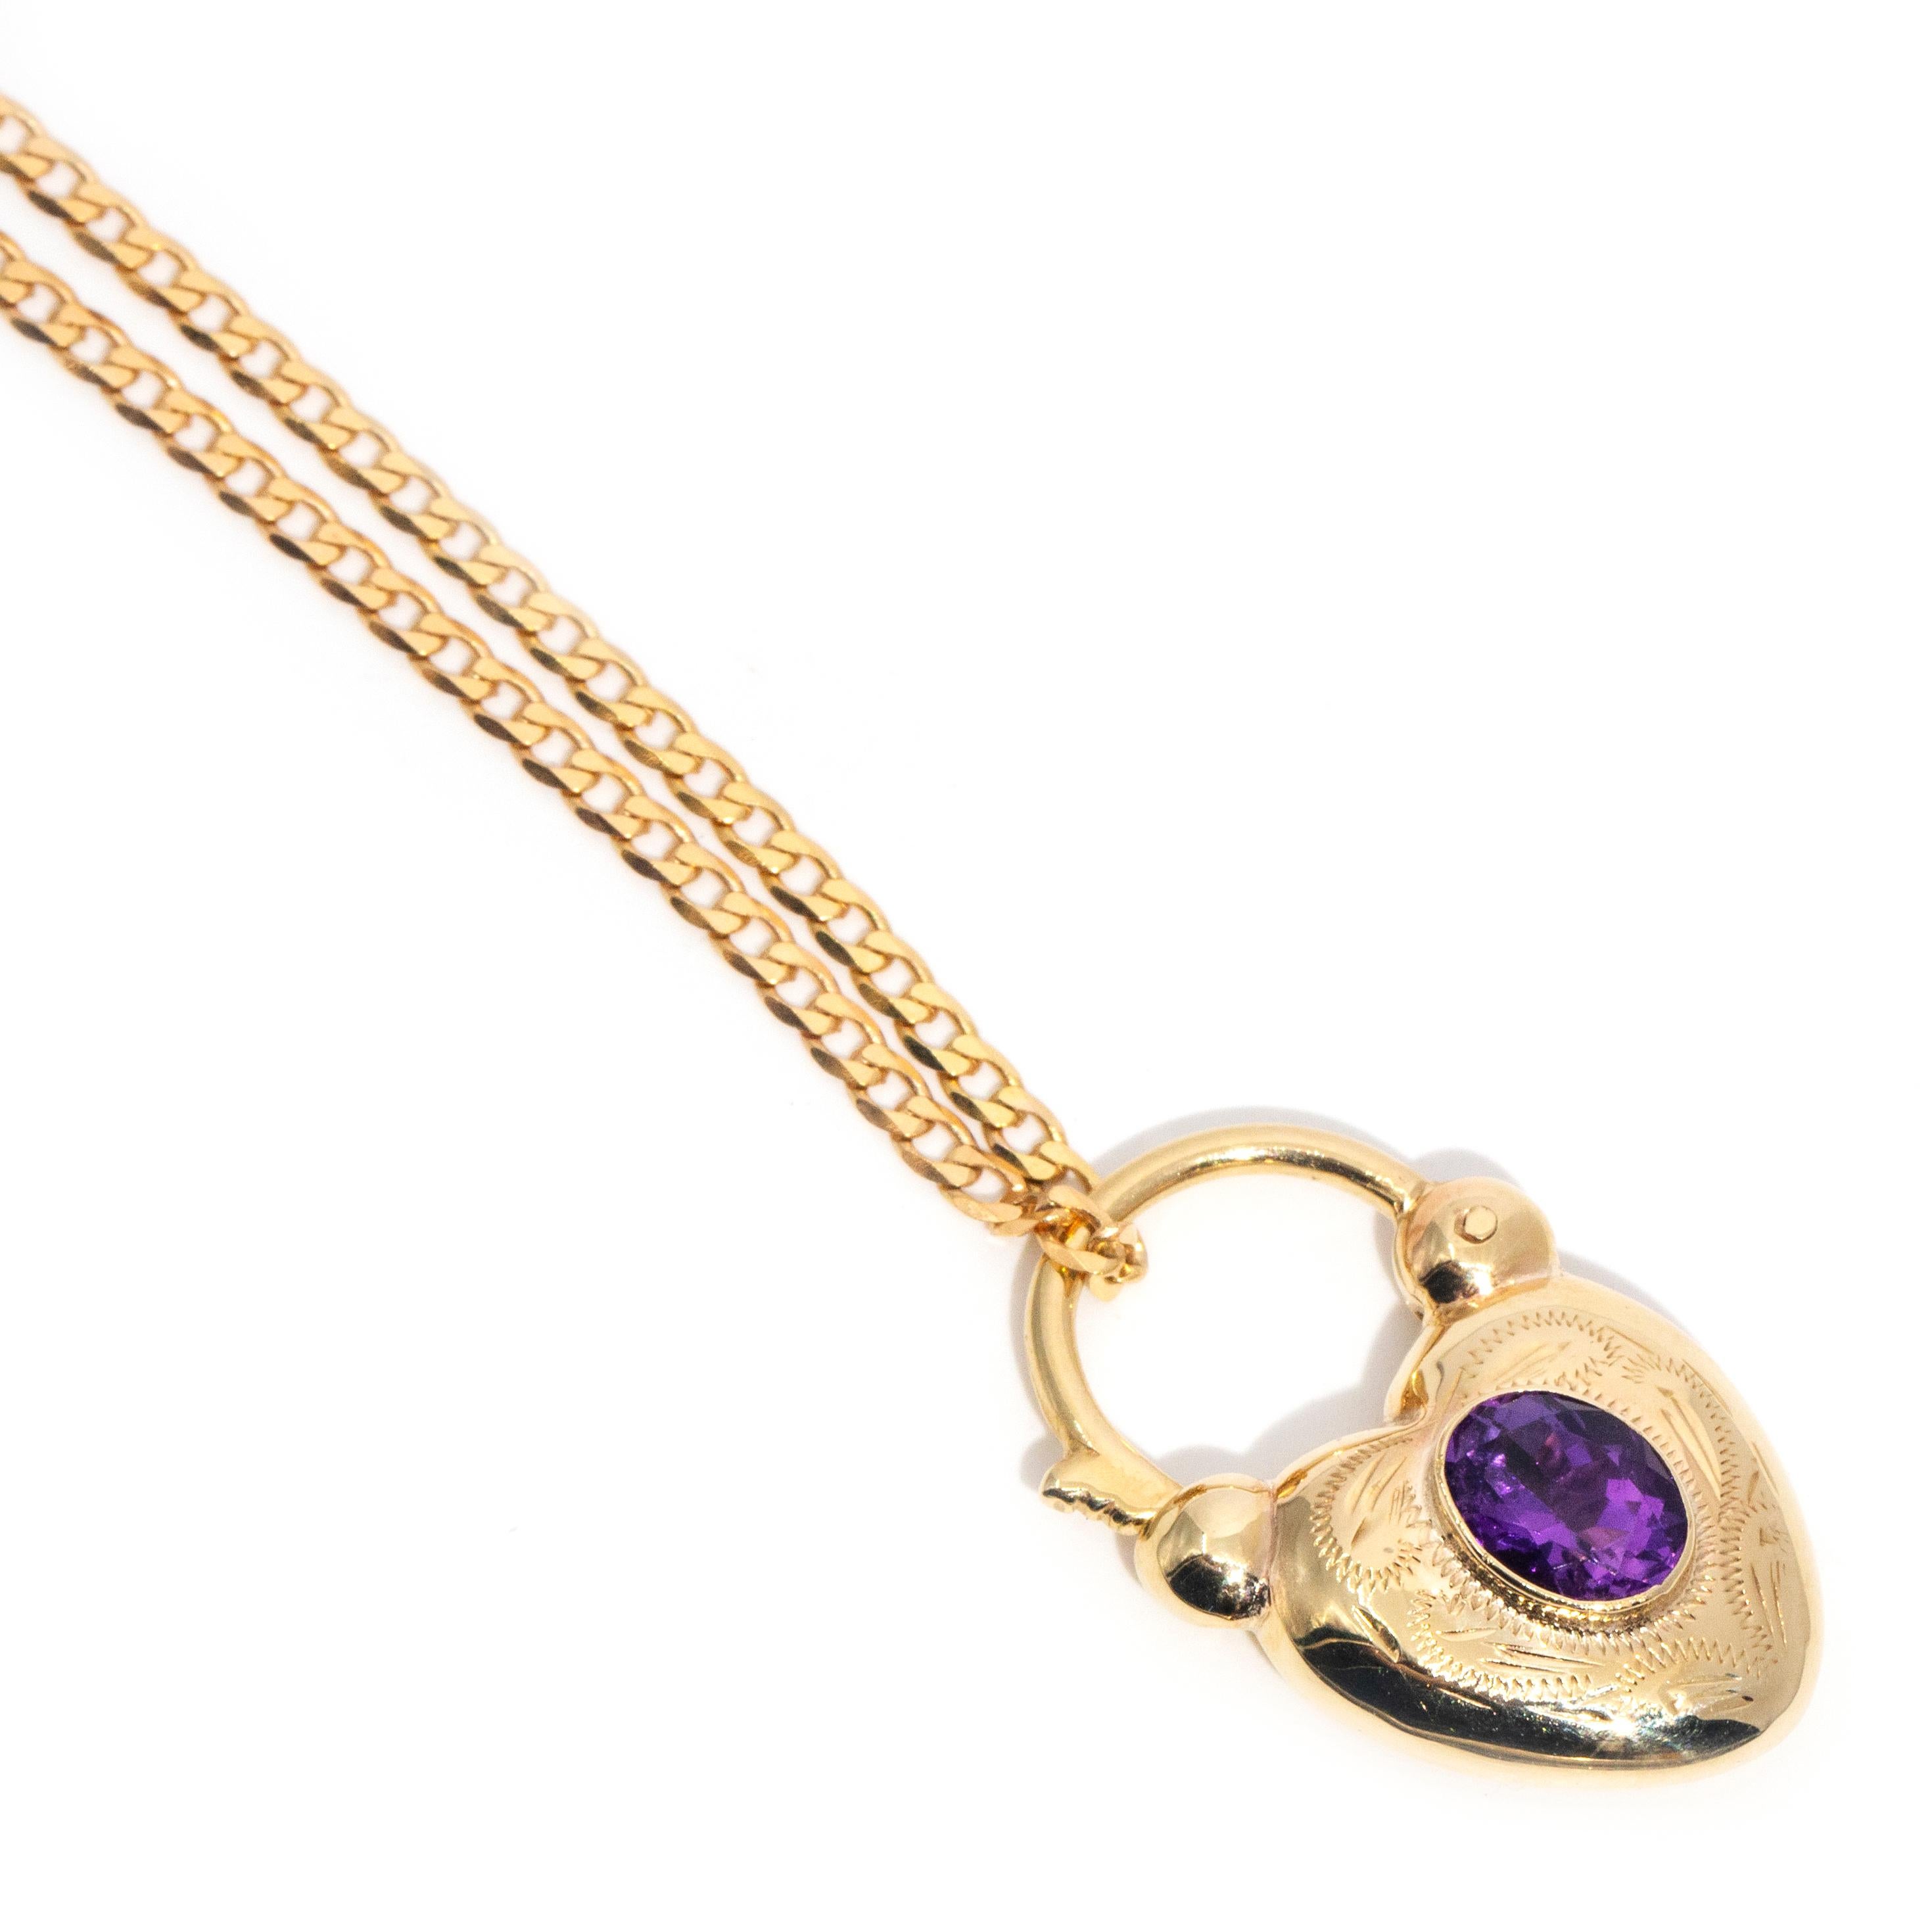 Vintage Circa 1970s Amethyst Heart Shaped Pendant & Chain 9 Carat Yellow Gold  For Sale 1